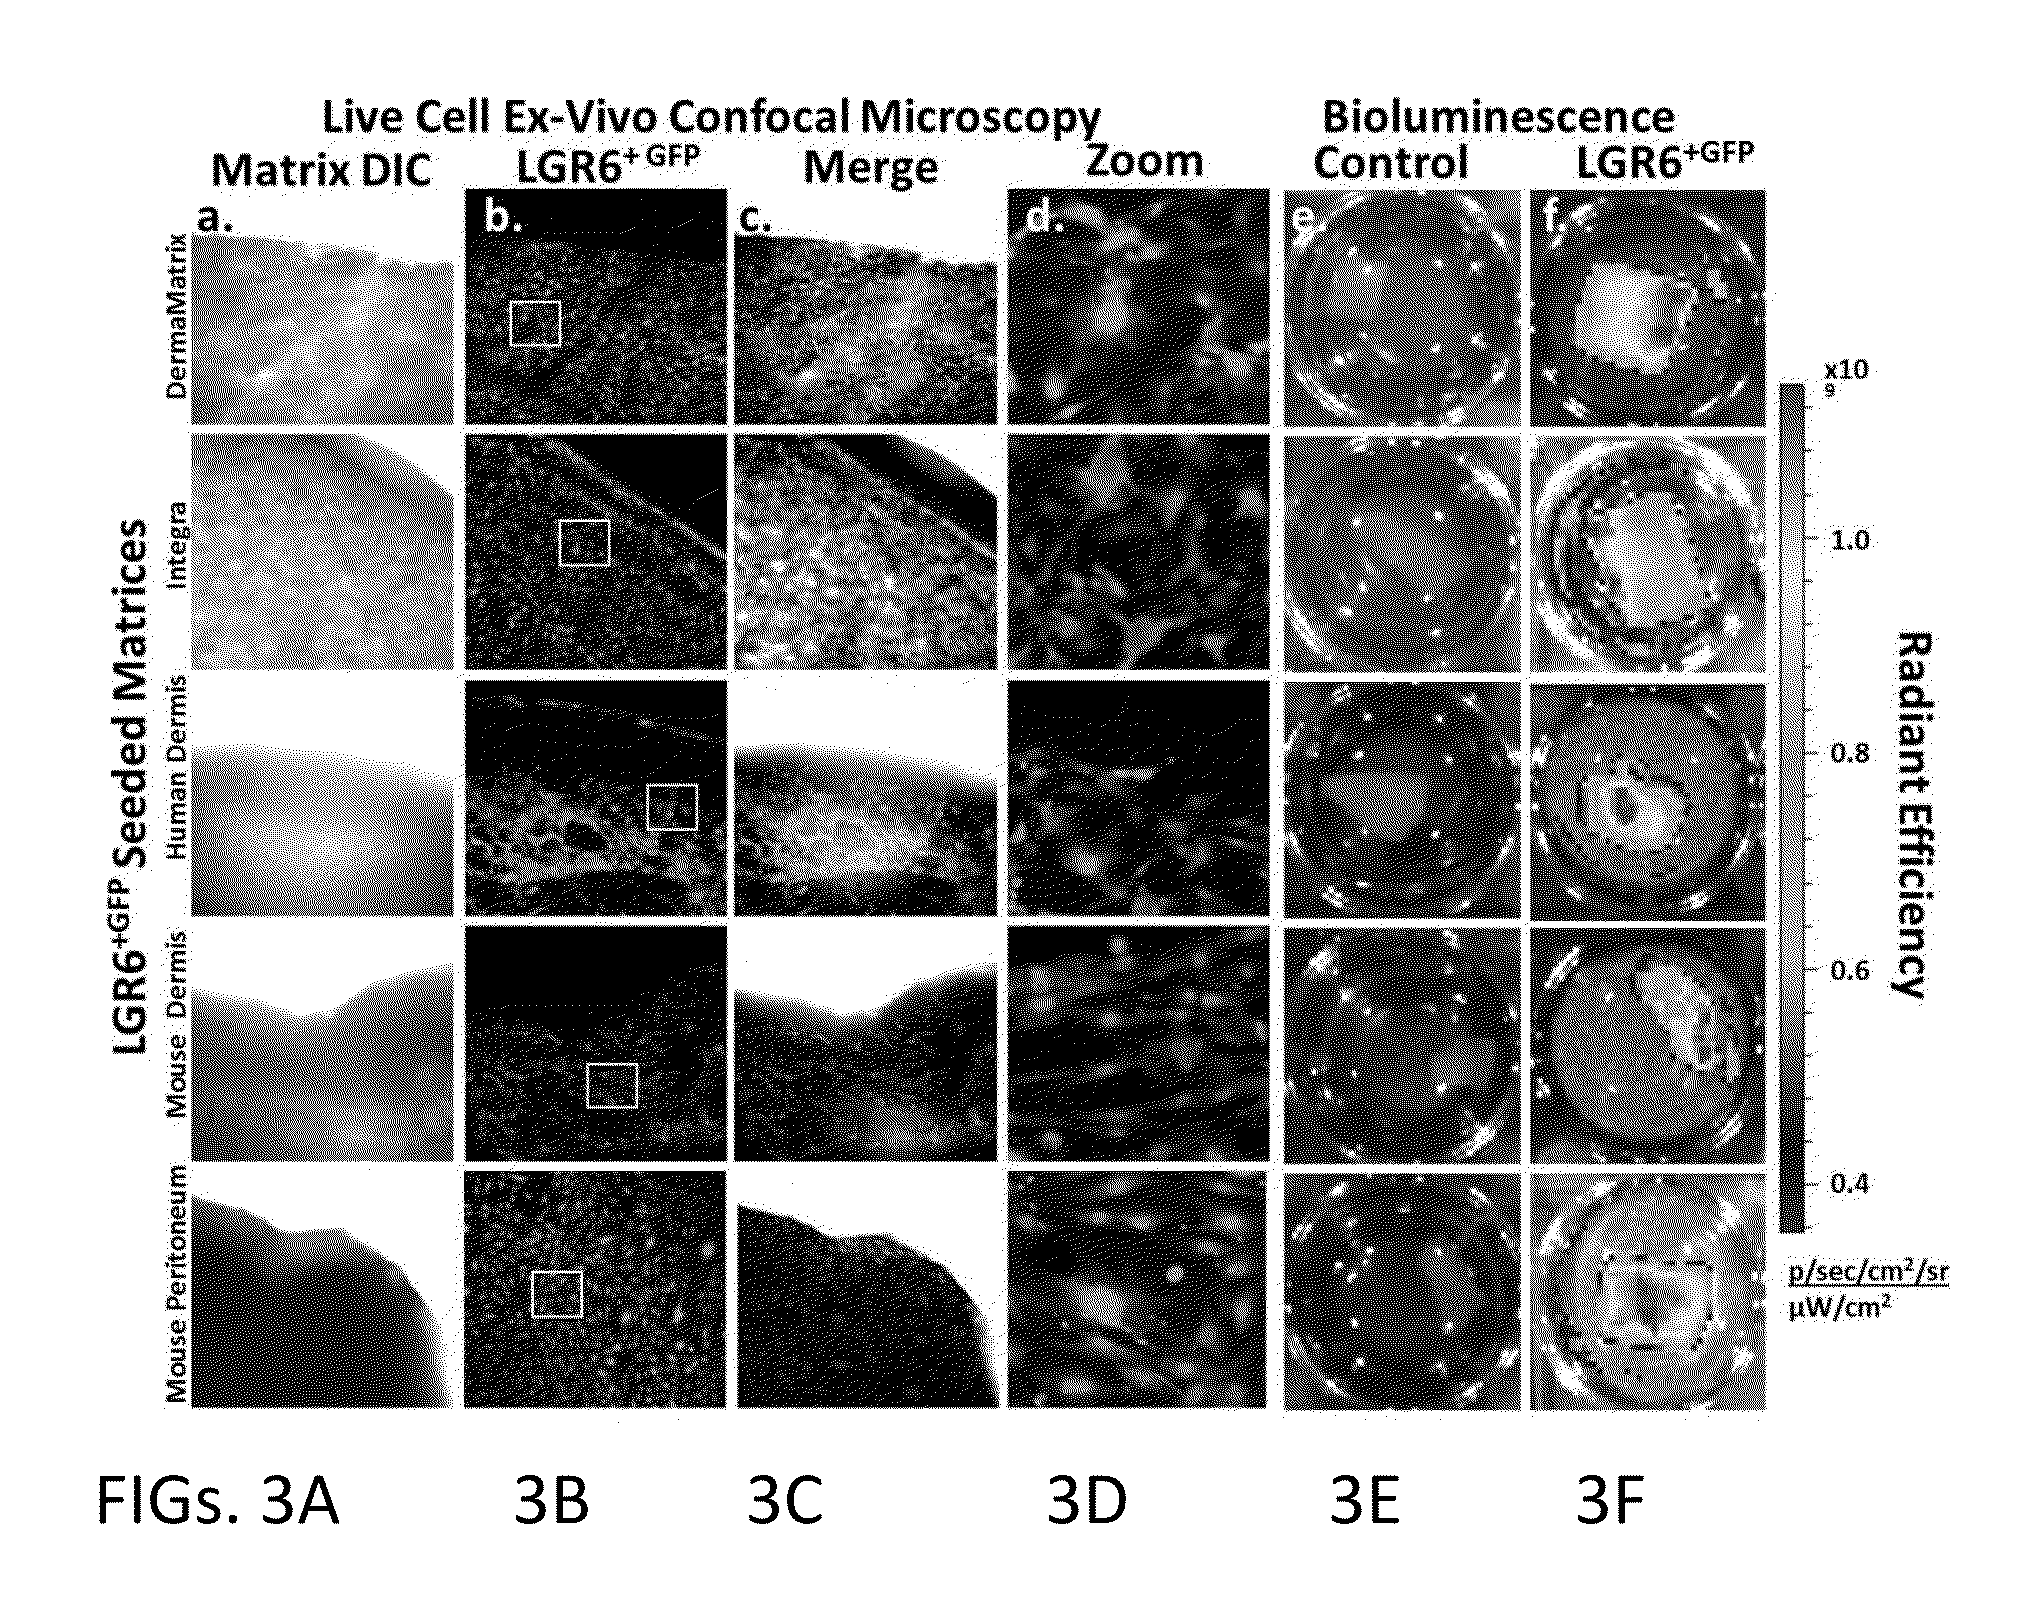 Methods for Development and Use of Minimally Polarized Function Cell Micro-Aggregate Units in Tissue Applications Using LGR4, LGR5 and LGR6 Expressing Epithelial Stem Cells